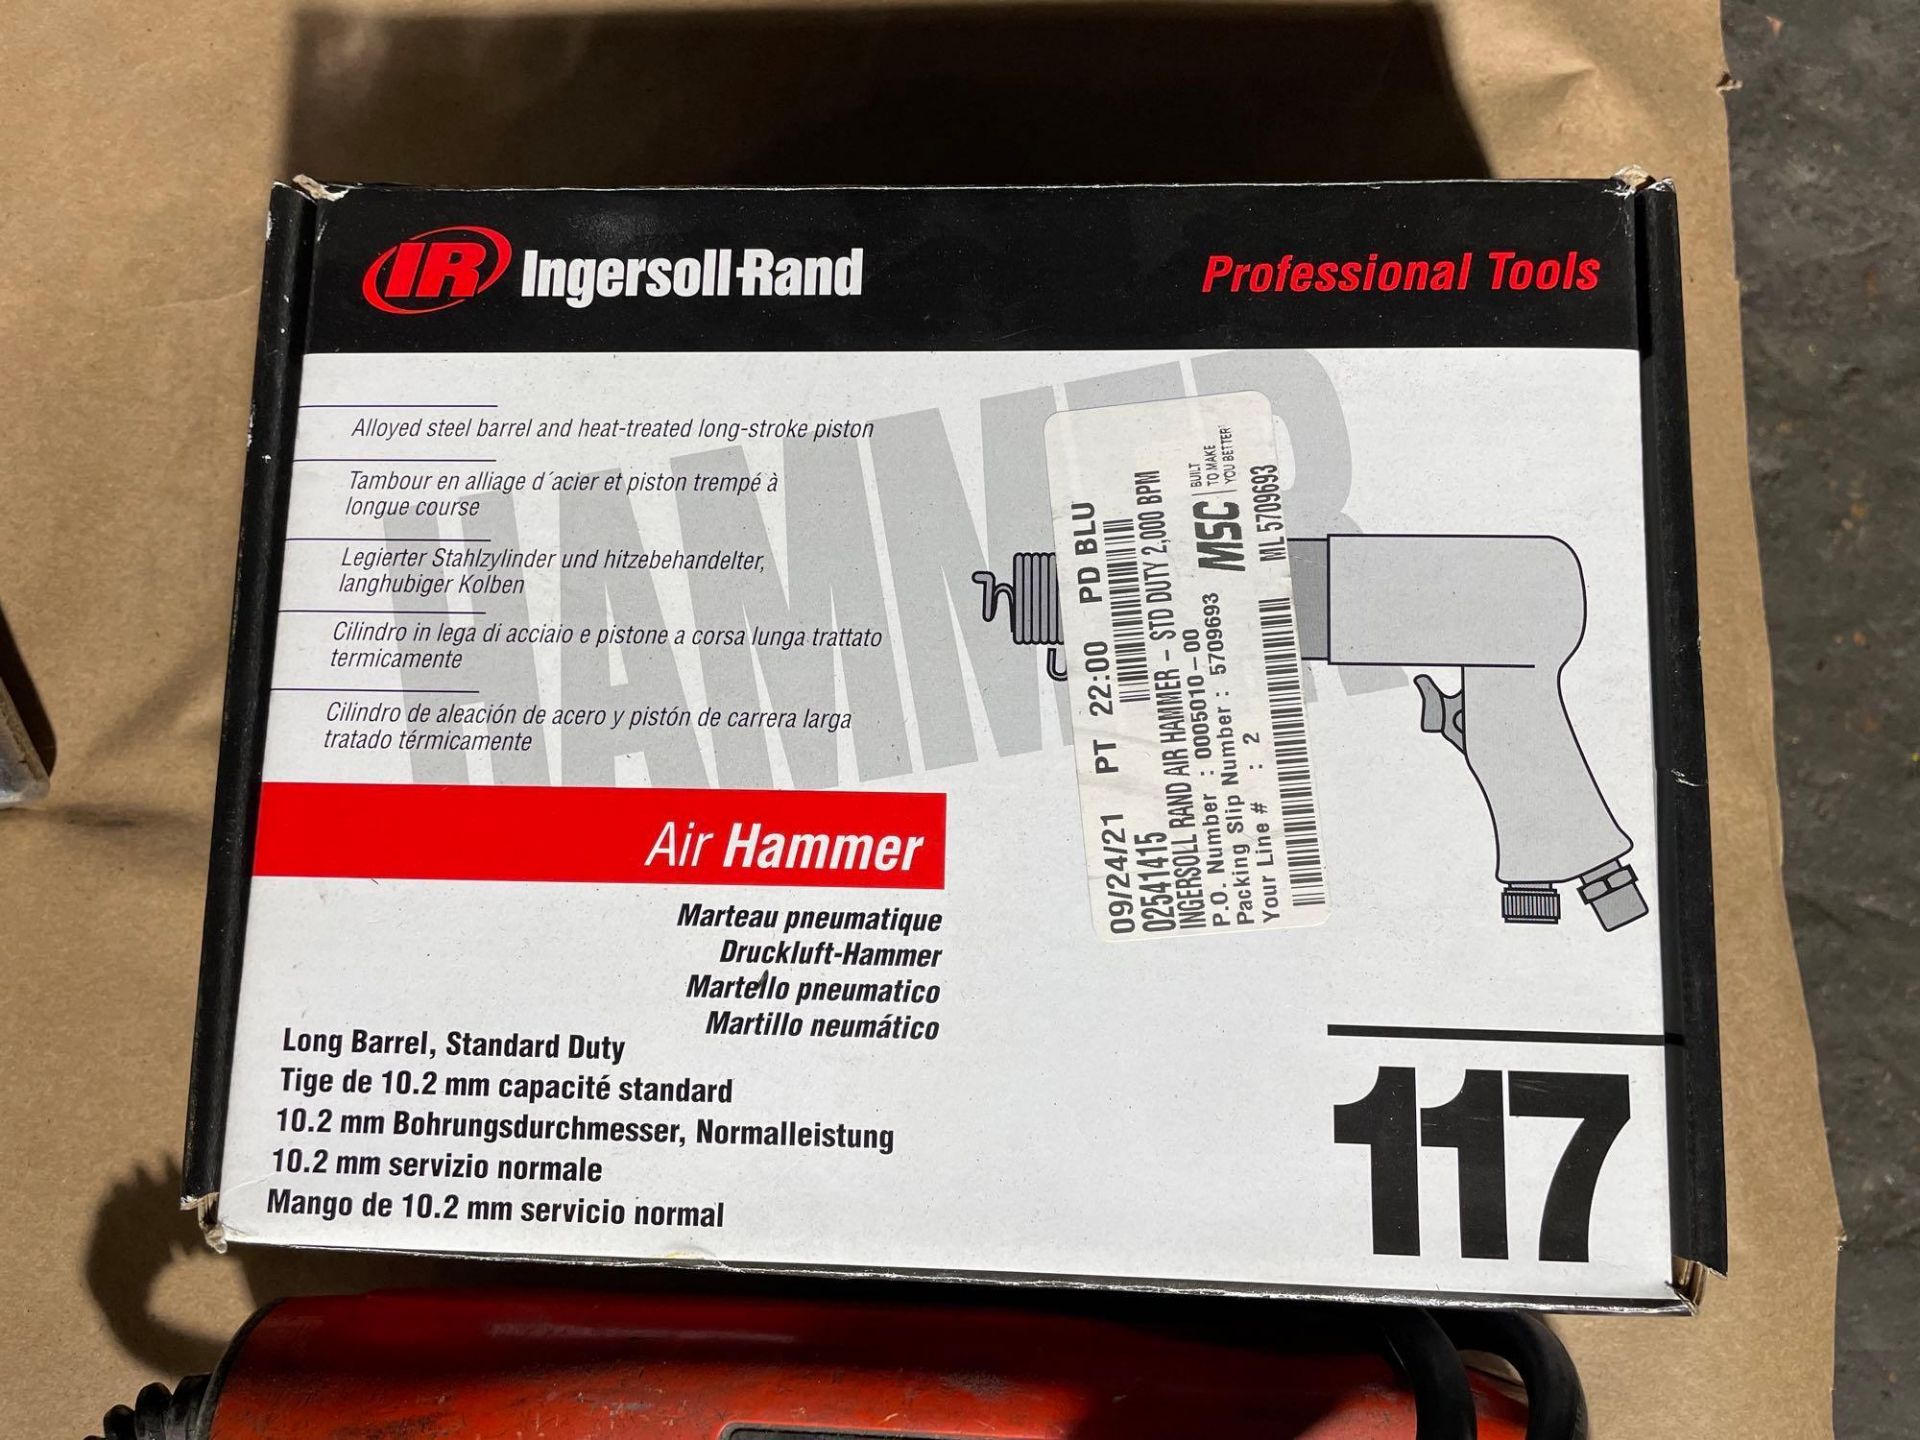 Lot of 2: (1) New Ingersoll-Rand Air Hammer , (10 Electro Spect Testing System Ferrous Probe) - Image 2 of 5